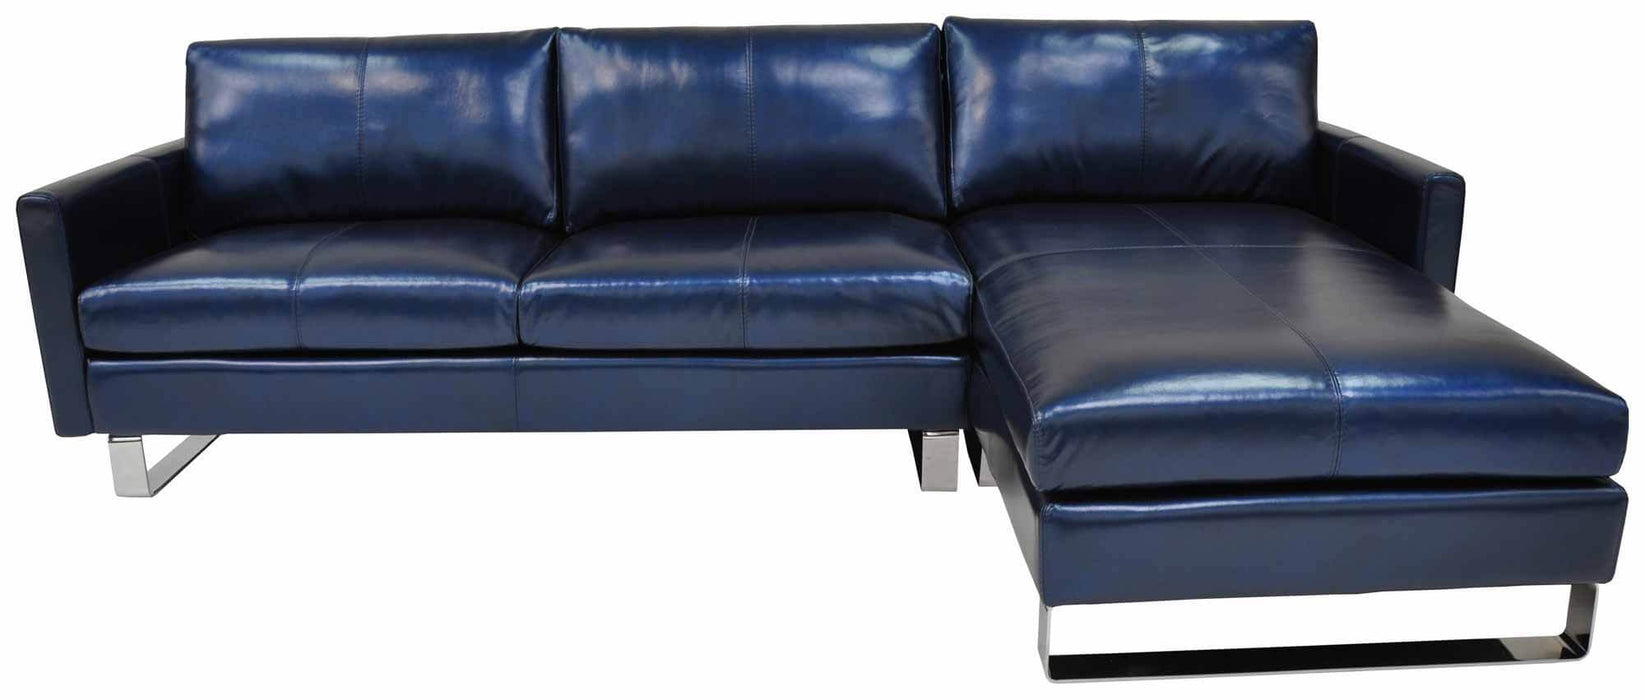 Concord Leather Sofa With Chaise | American Style | Wellington's Fine Leather Furniture